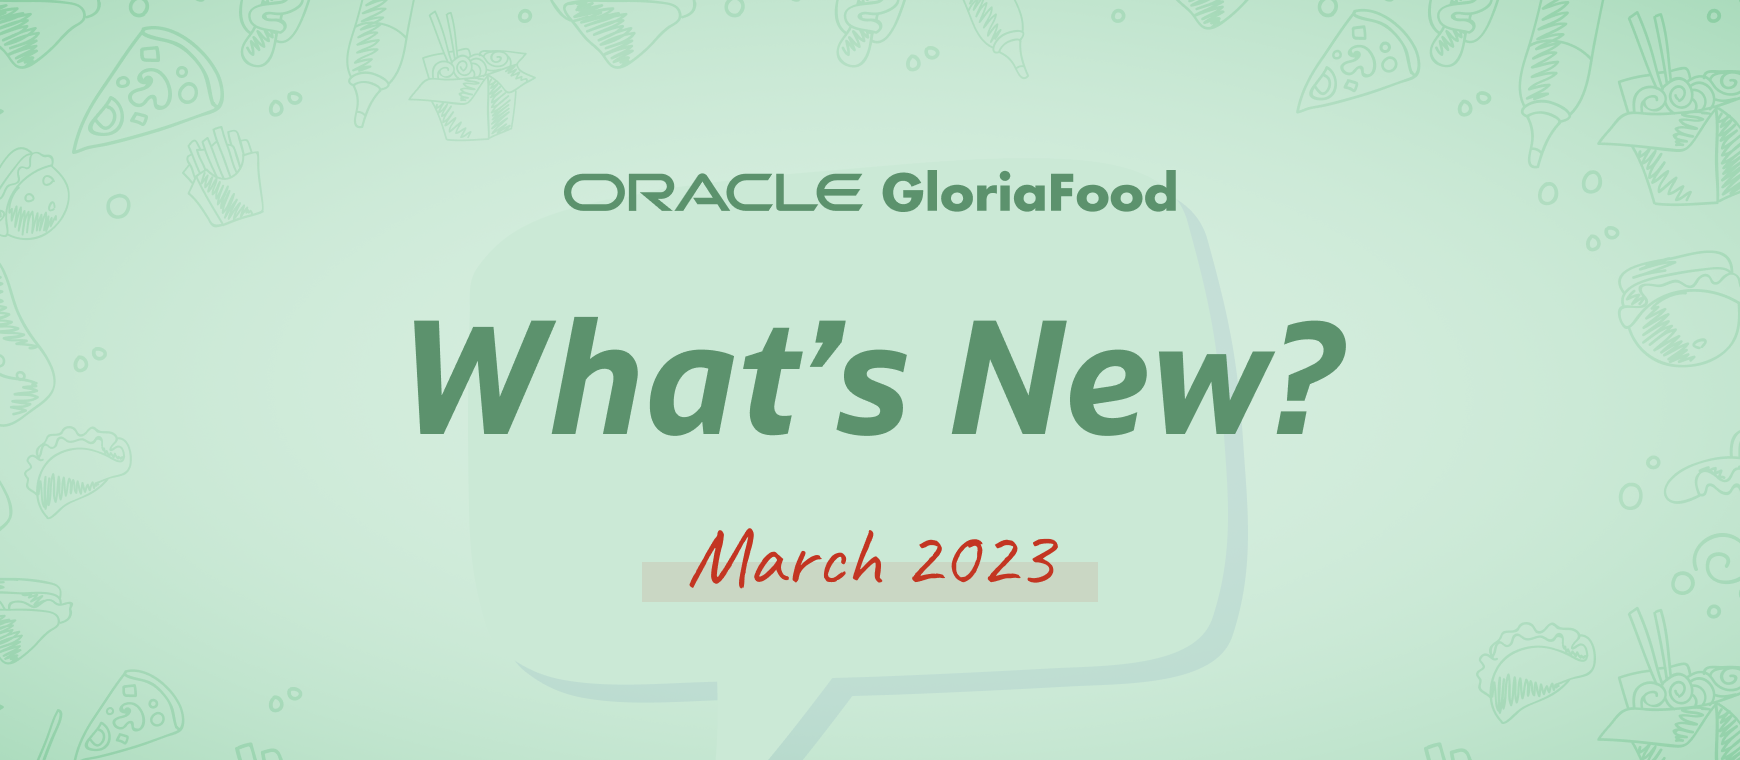 gloriafood updates march 2023